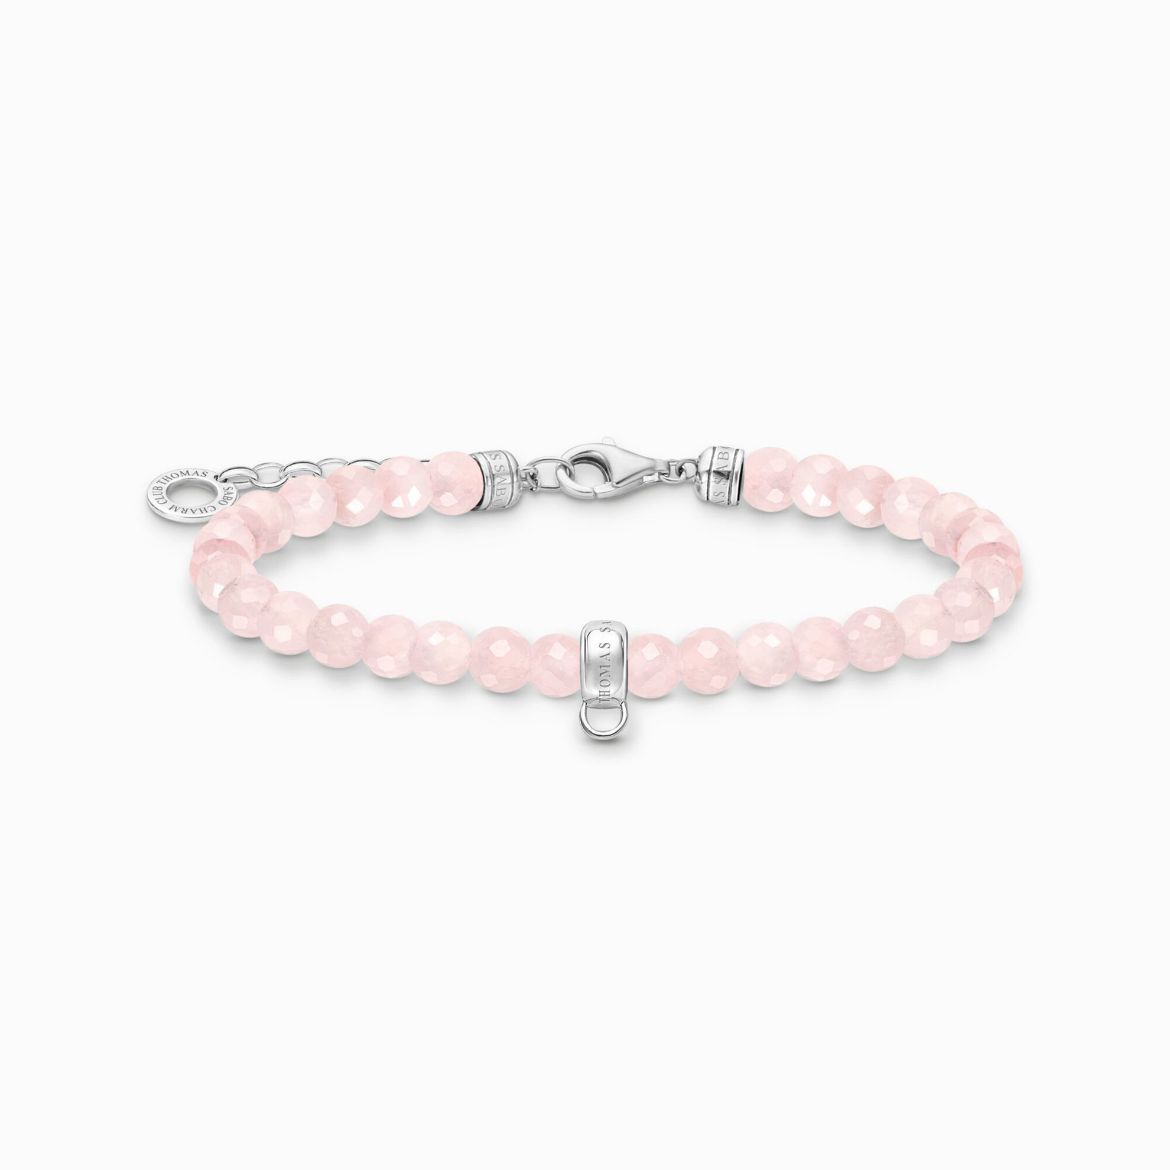 Picture of Charm Bracelet with Rose Quartz Beads in Silver